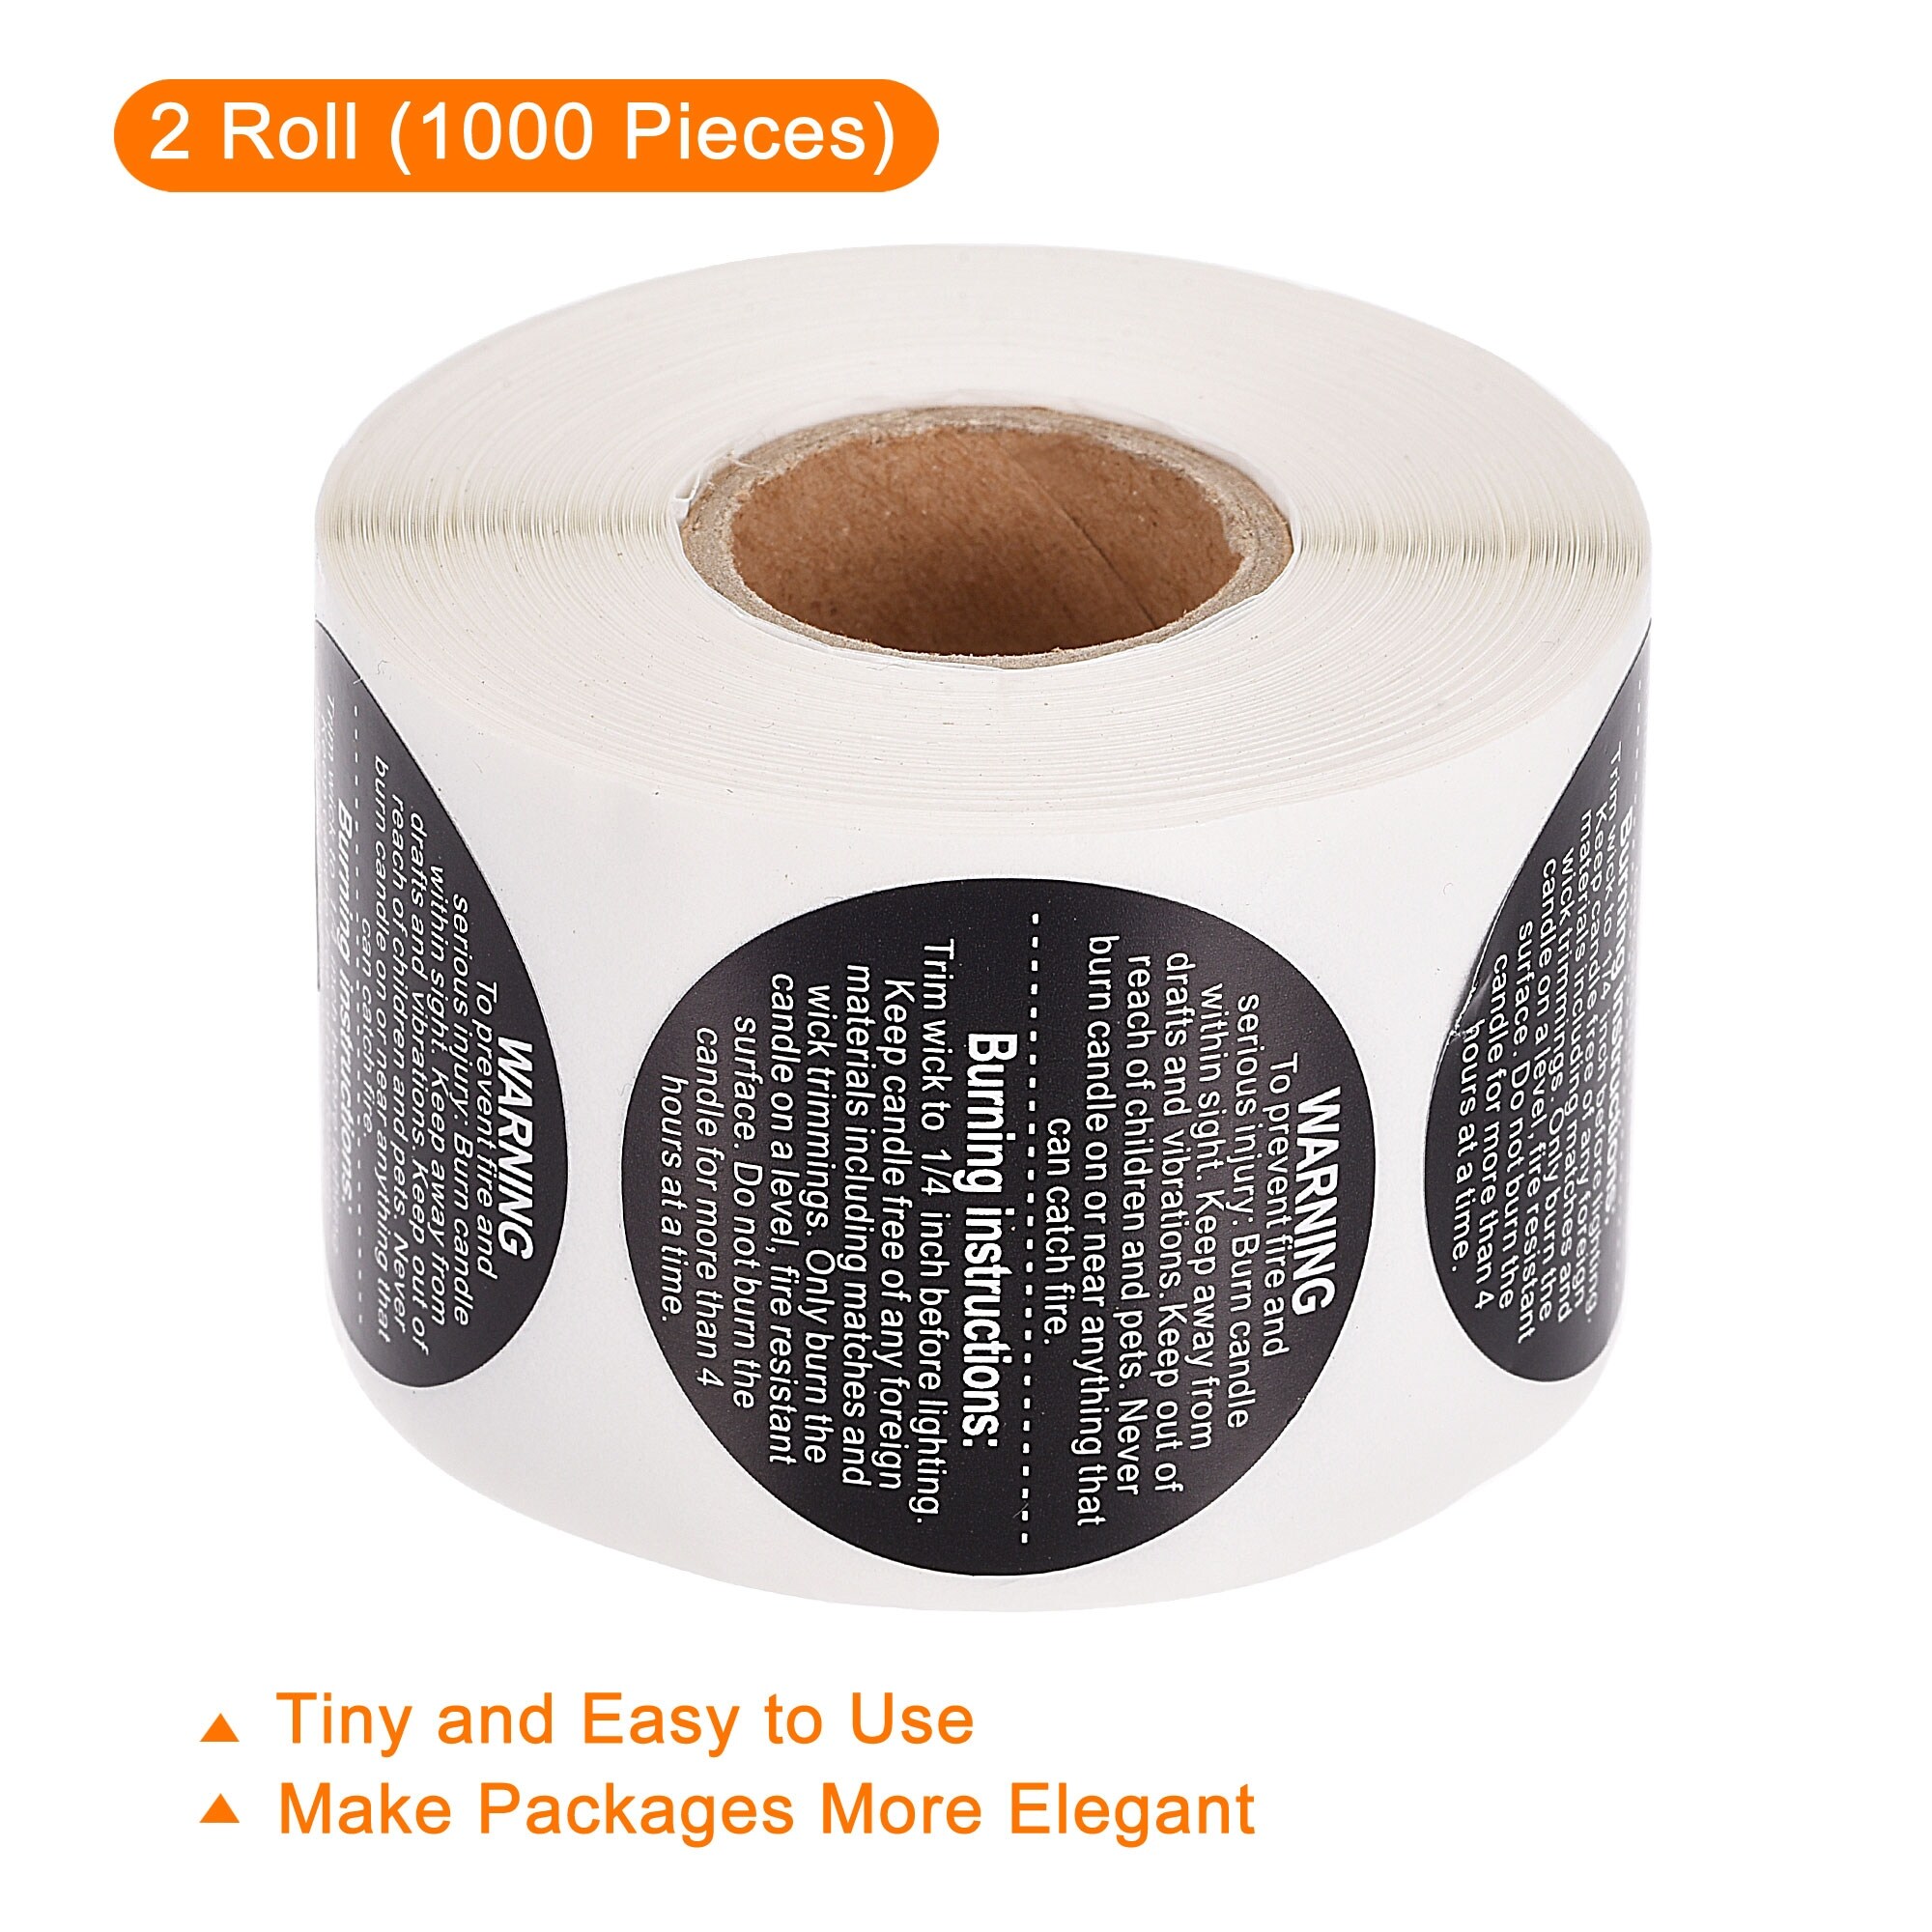 CandleScience Warning Labels 2 inch 1000 PC Roll